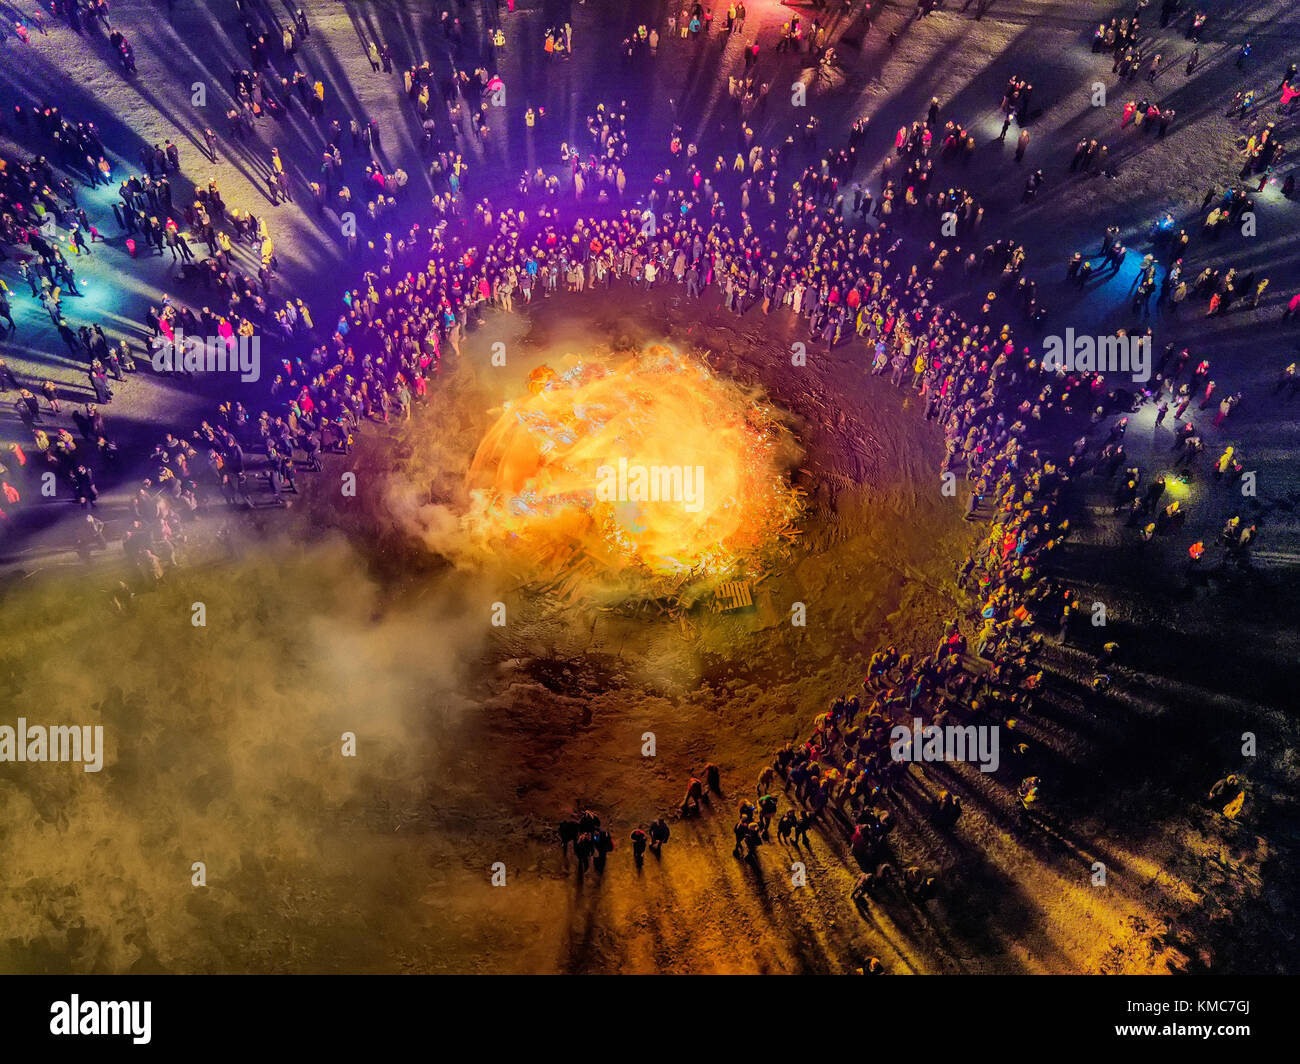 New Year´s Eve Celebration. Bonfires and fireworks on New Year´s is an annual event, Reykjavik, Iceland. This image is shot with a drone. Stock Photo